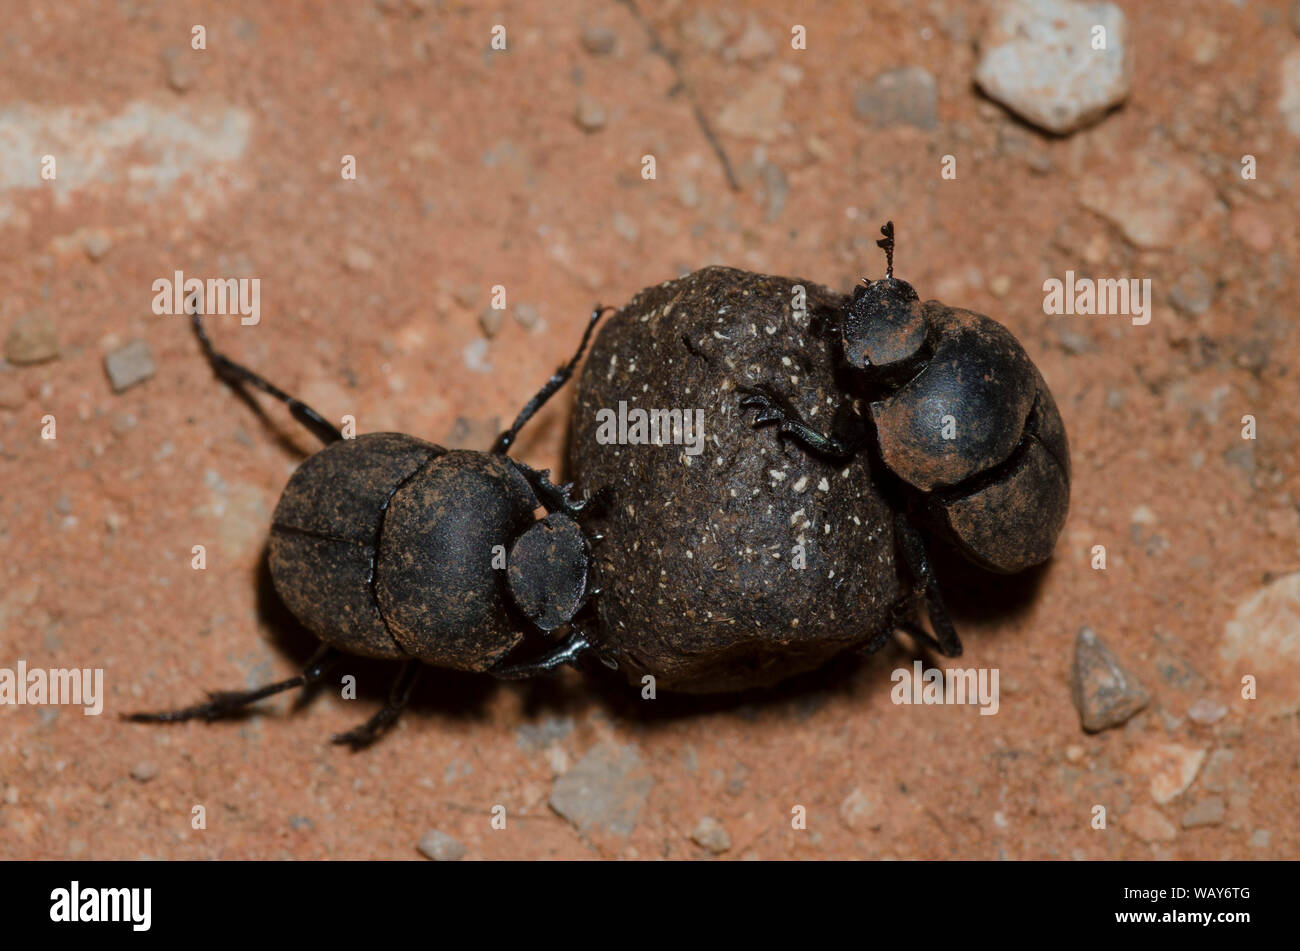 Dung Beetles, Subfamily Scarabaeinae, rolling dung ball Stock Photo